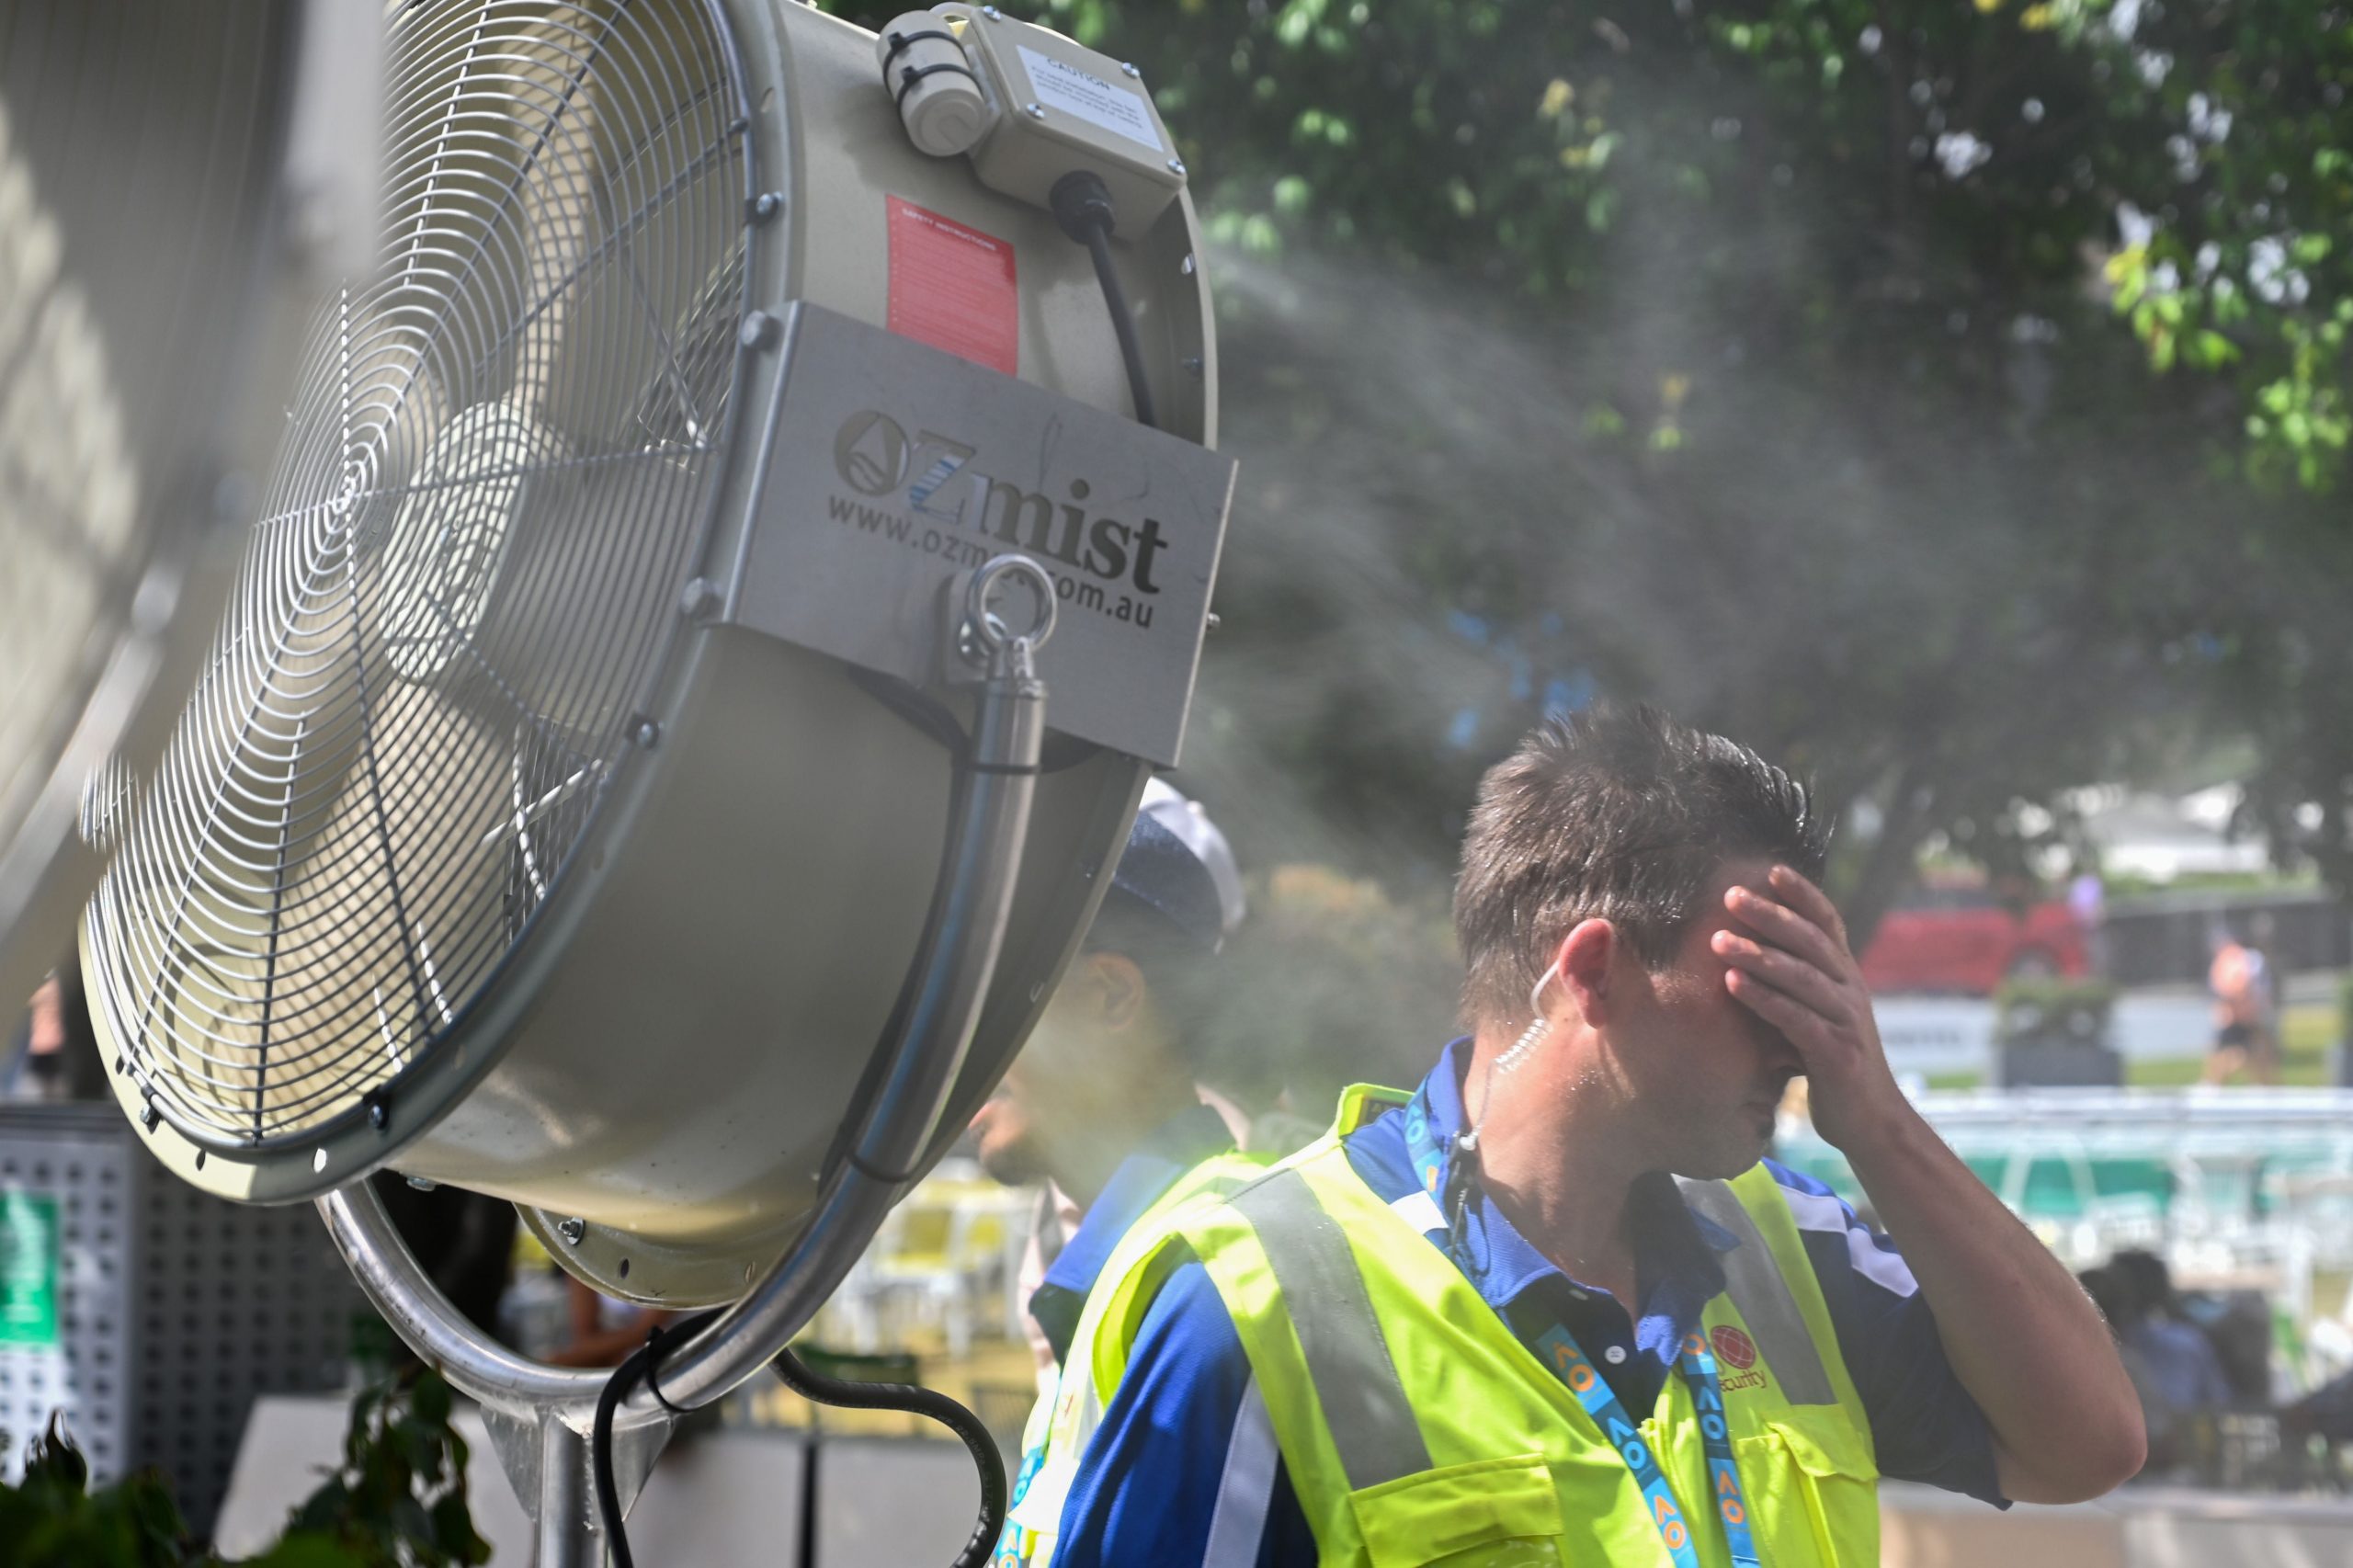 A man wipes sweat from his face in sweltering heat.